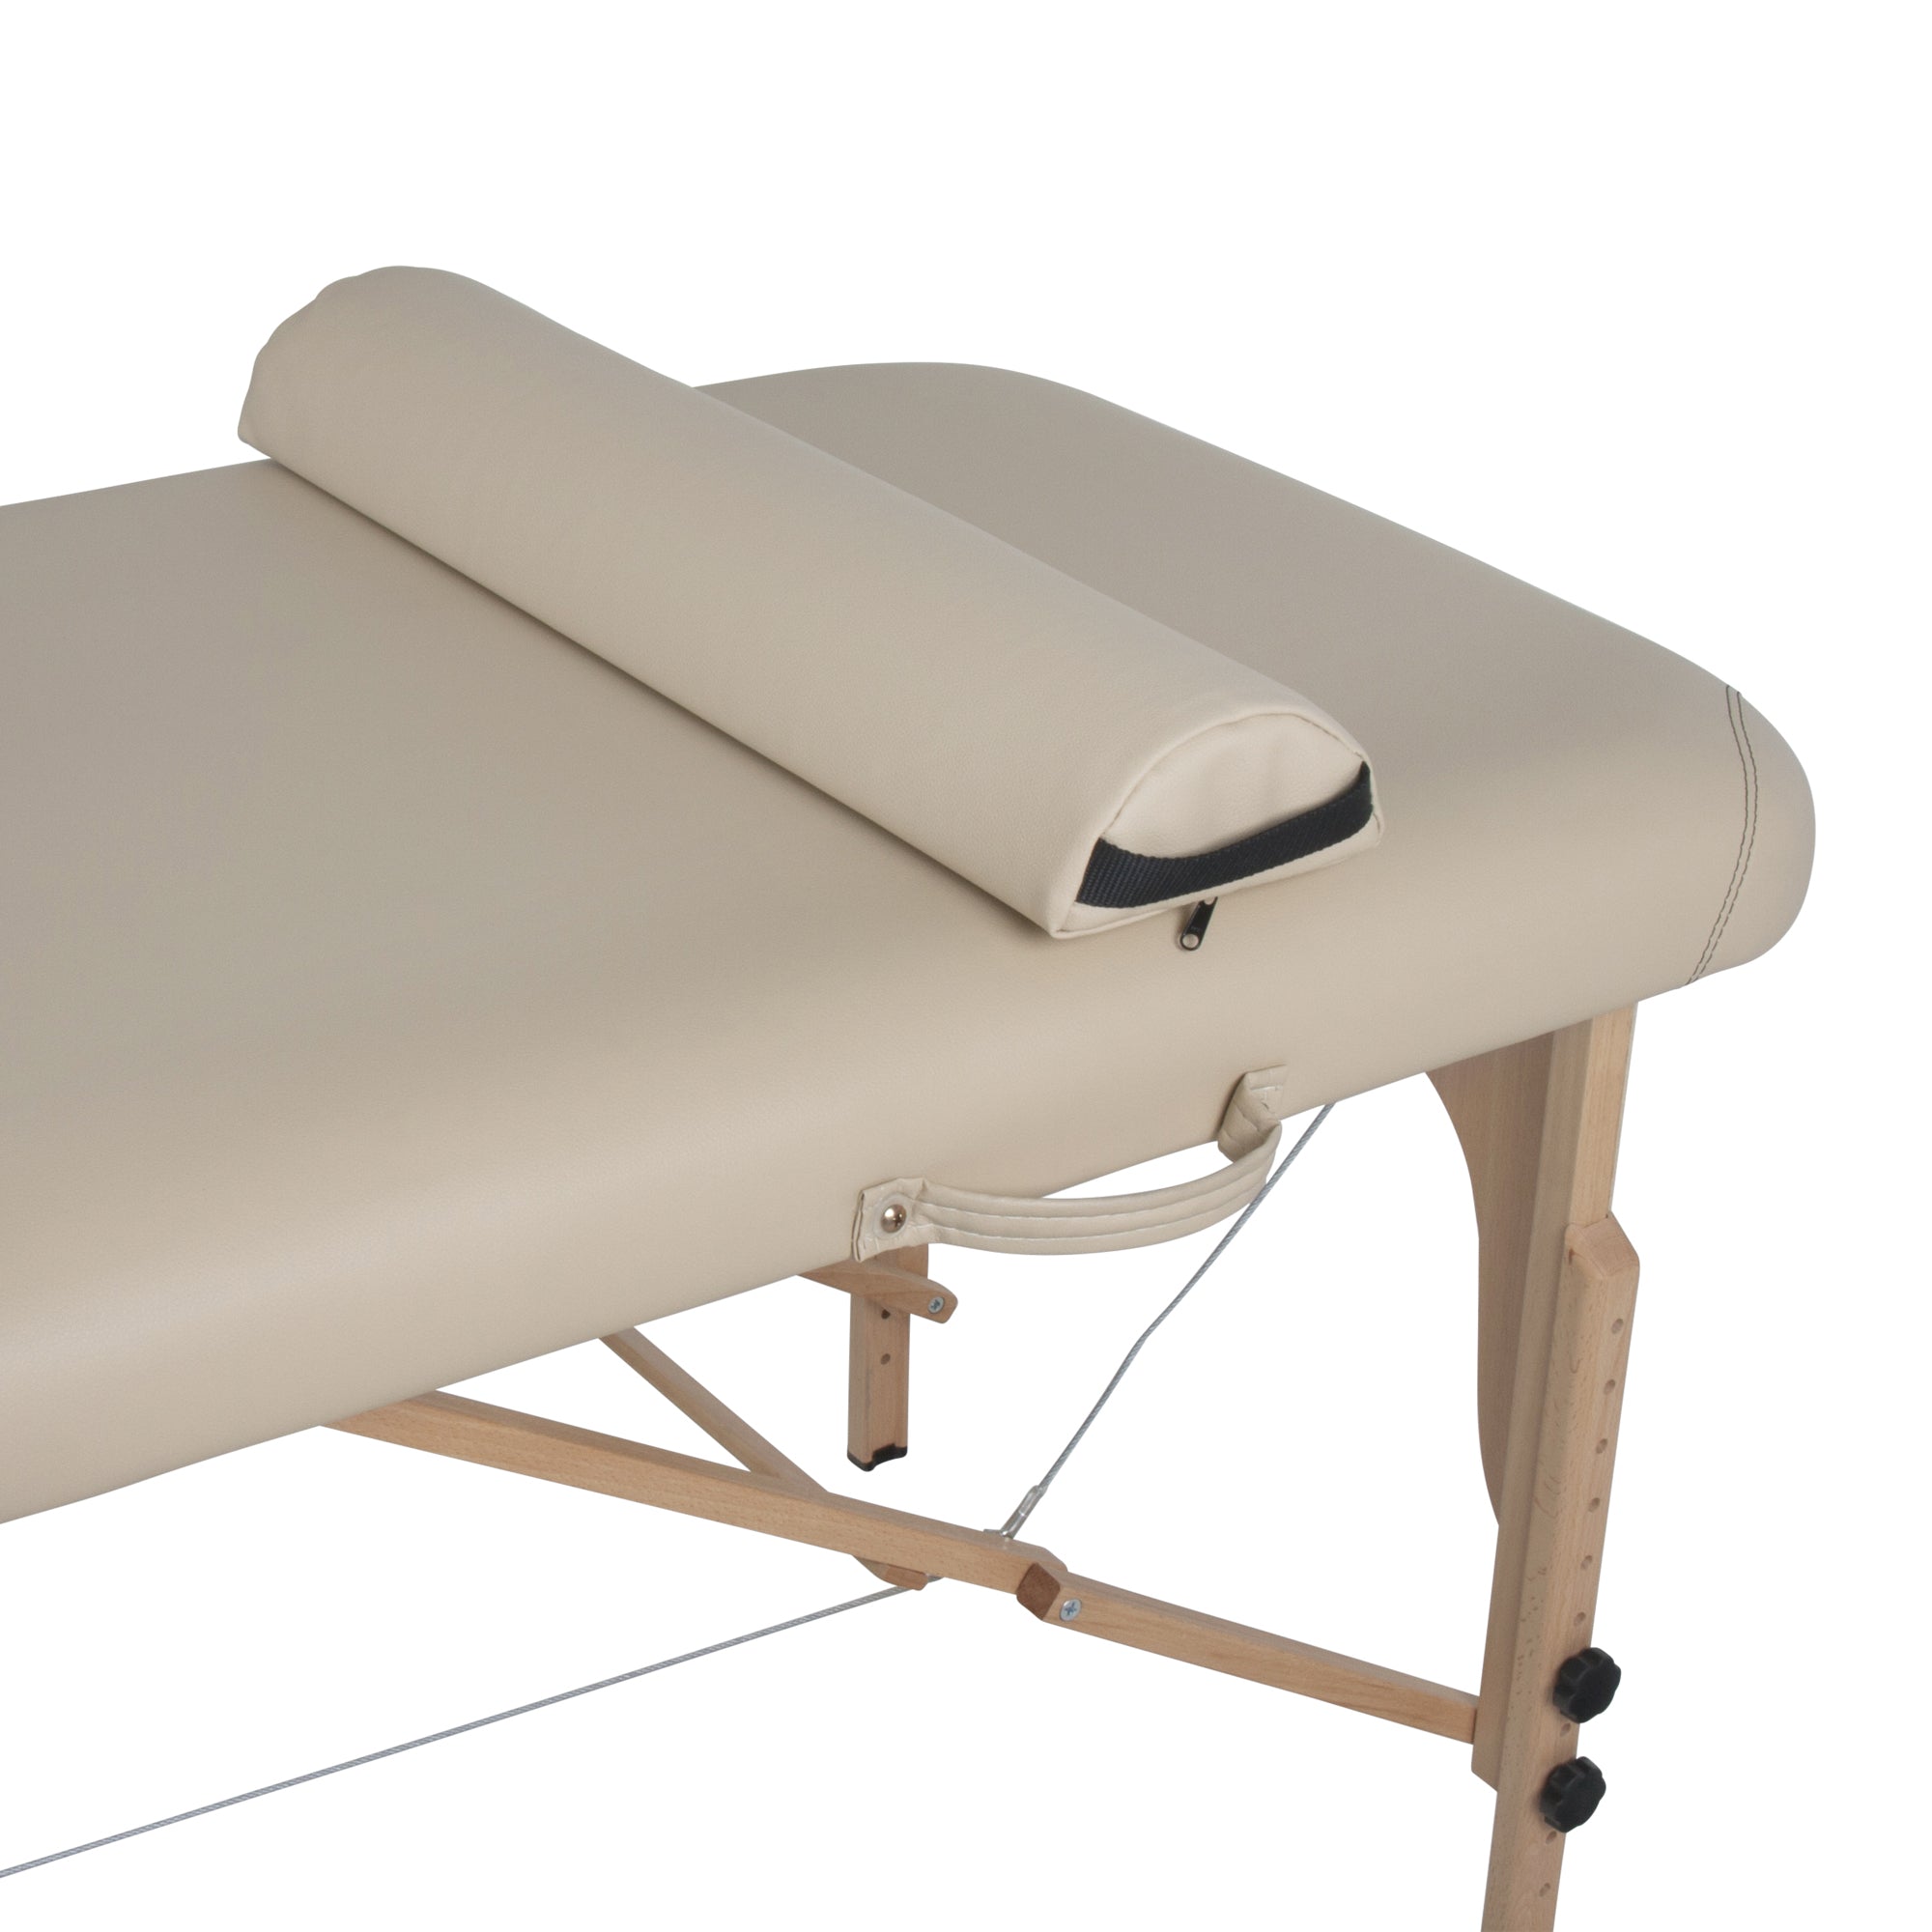 StrongLite Olympia Portable Massage Table Package